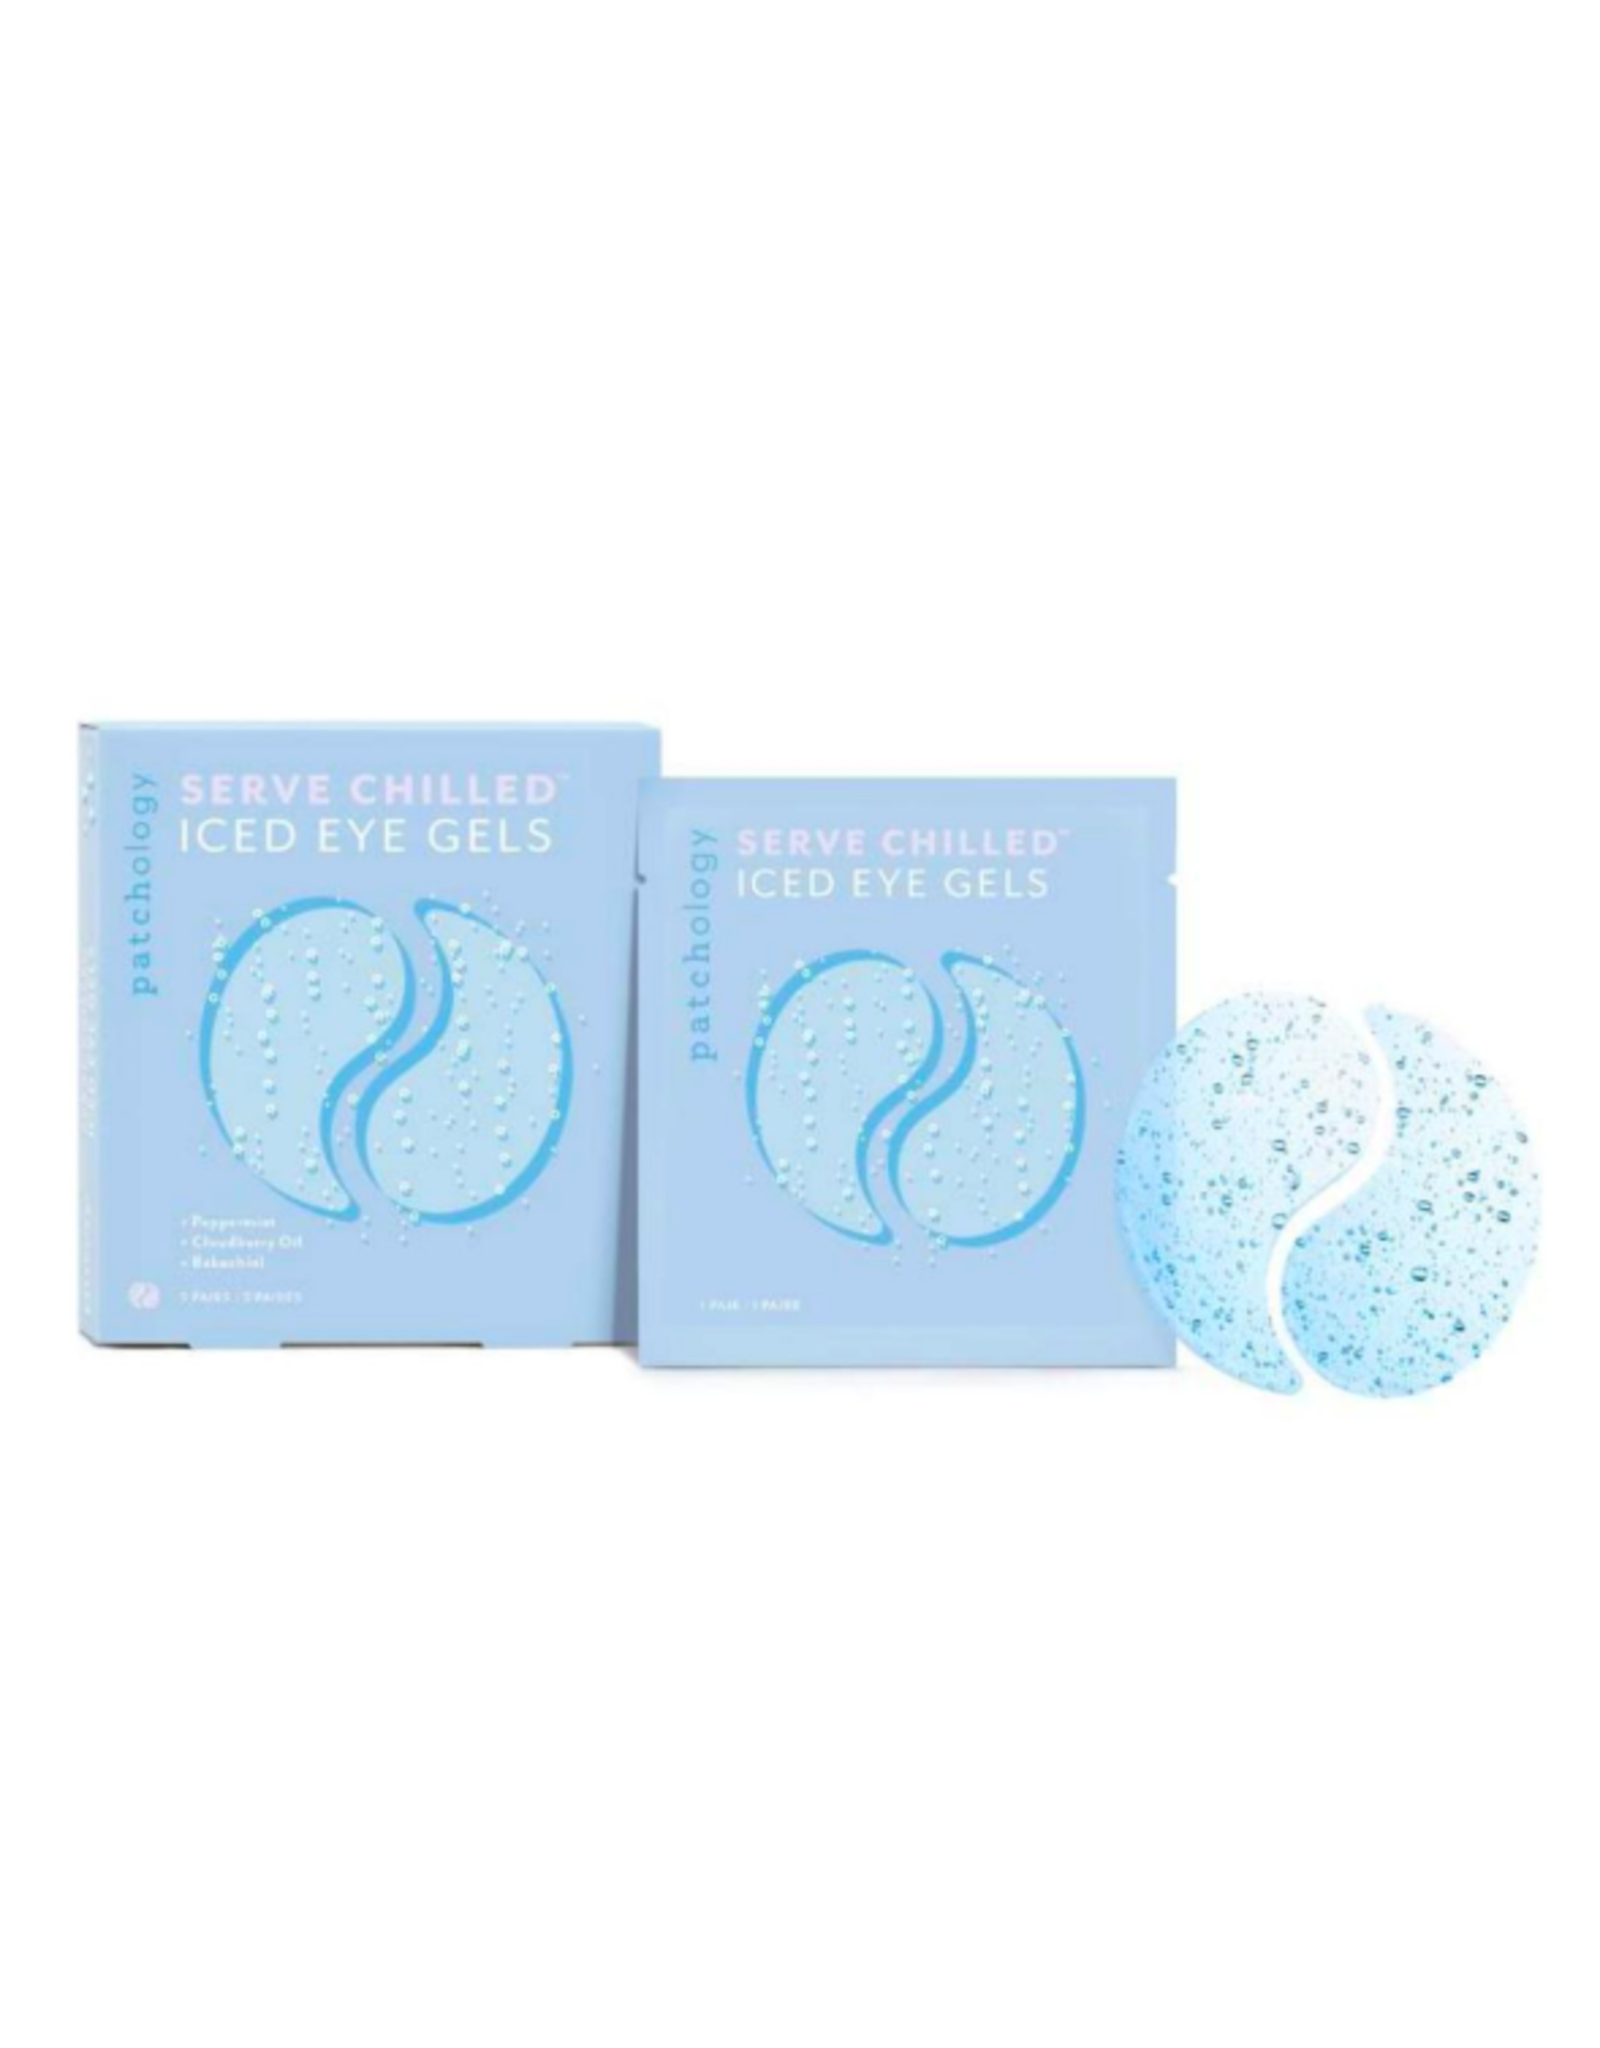 Patchology Serve Chilled Iced Eye Gels - Single